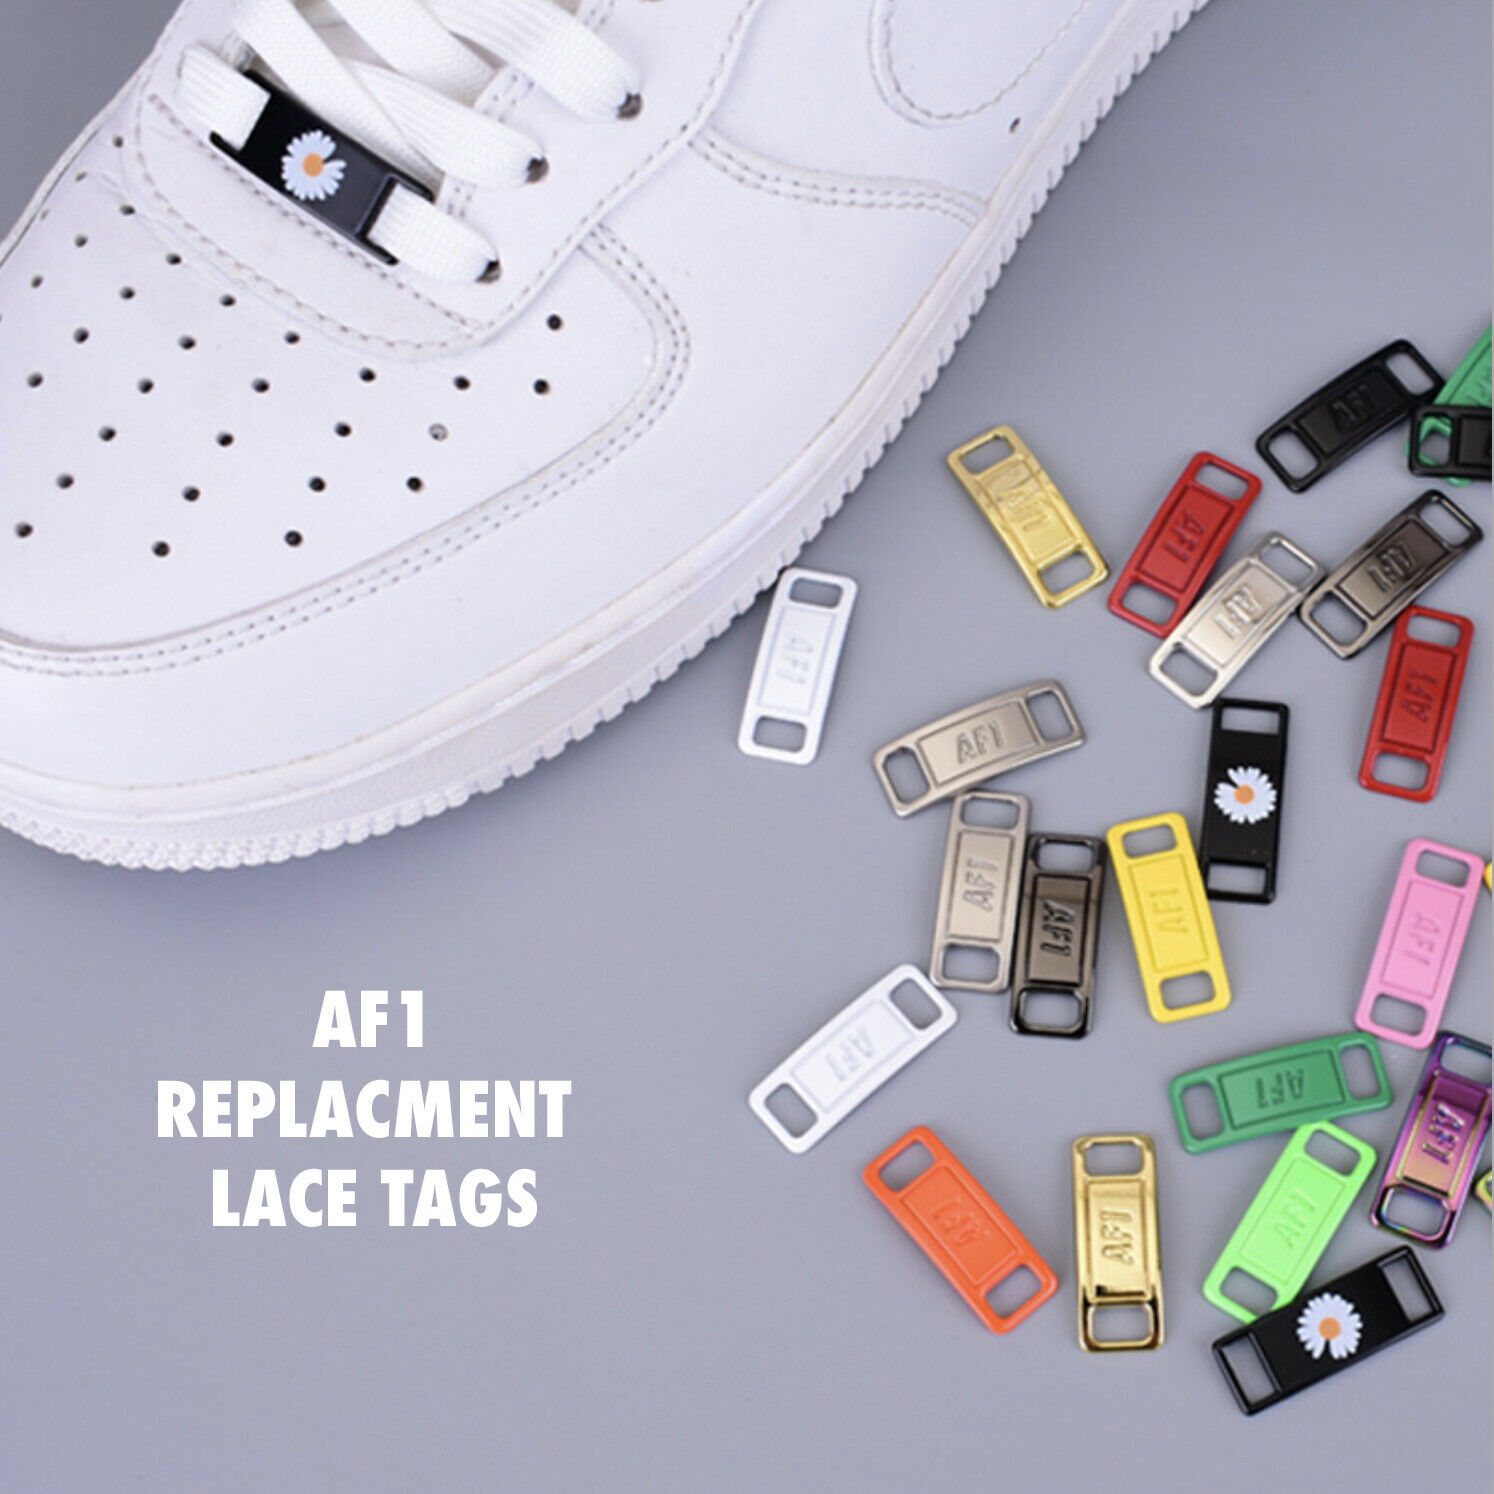 Af1 Replacement Lace Tags Locks Air Force Ones Dubraes Buy 2 Get 1 Free